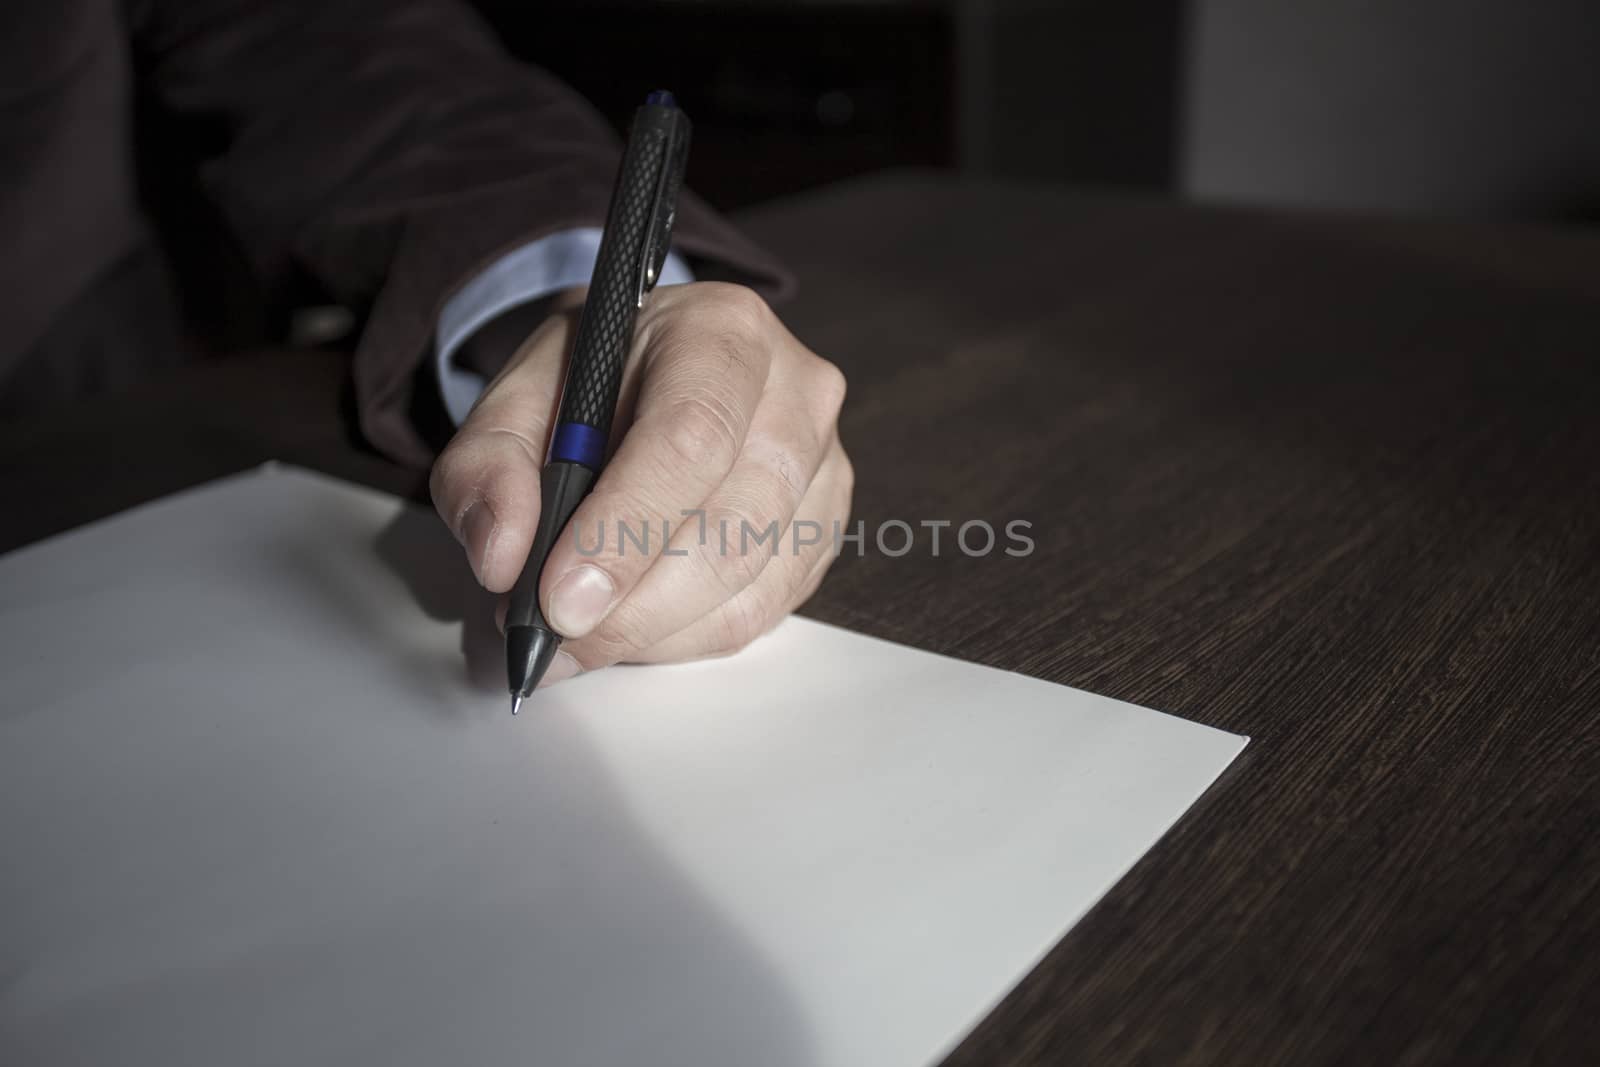 Signing of the contract by snep_photo